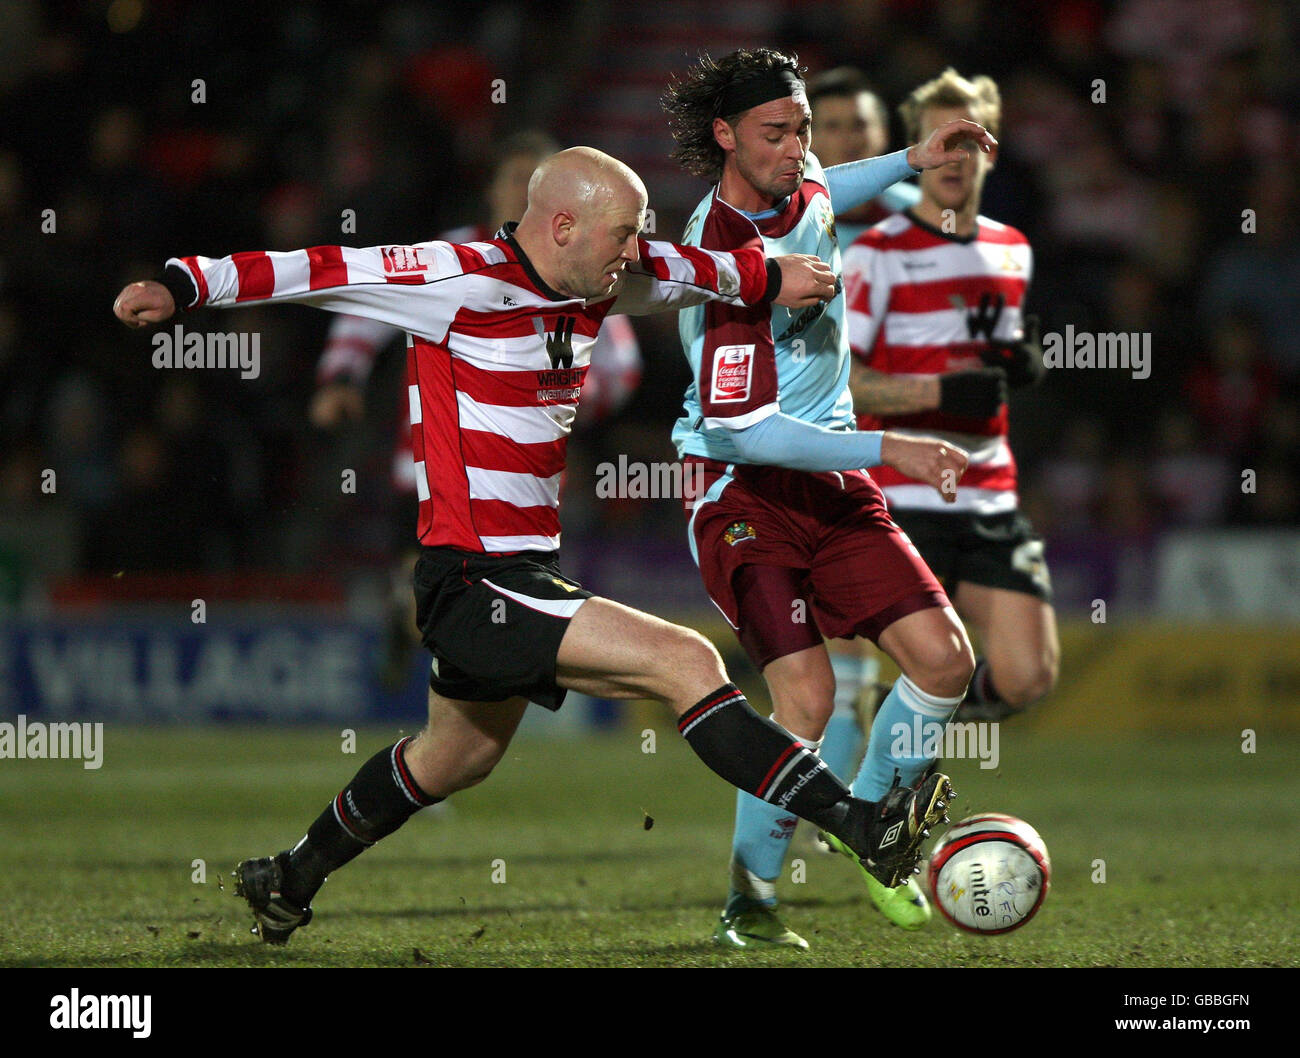 Doncaster Rovers' James O'Connor and Burnley's Chris Eagles battle for the ball during the Coca-Cola Championship match at Keepmoat Stadium, Doncaster. Stock Photo